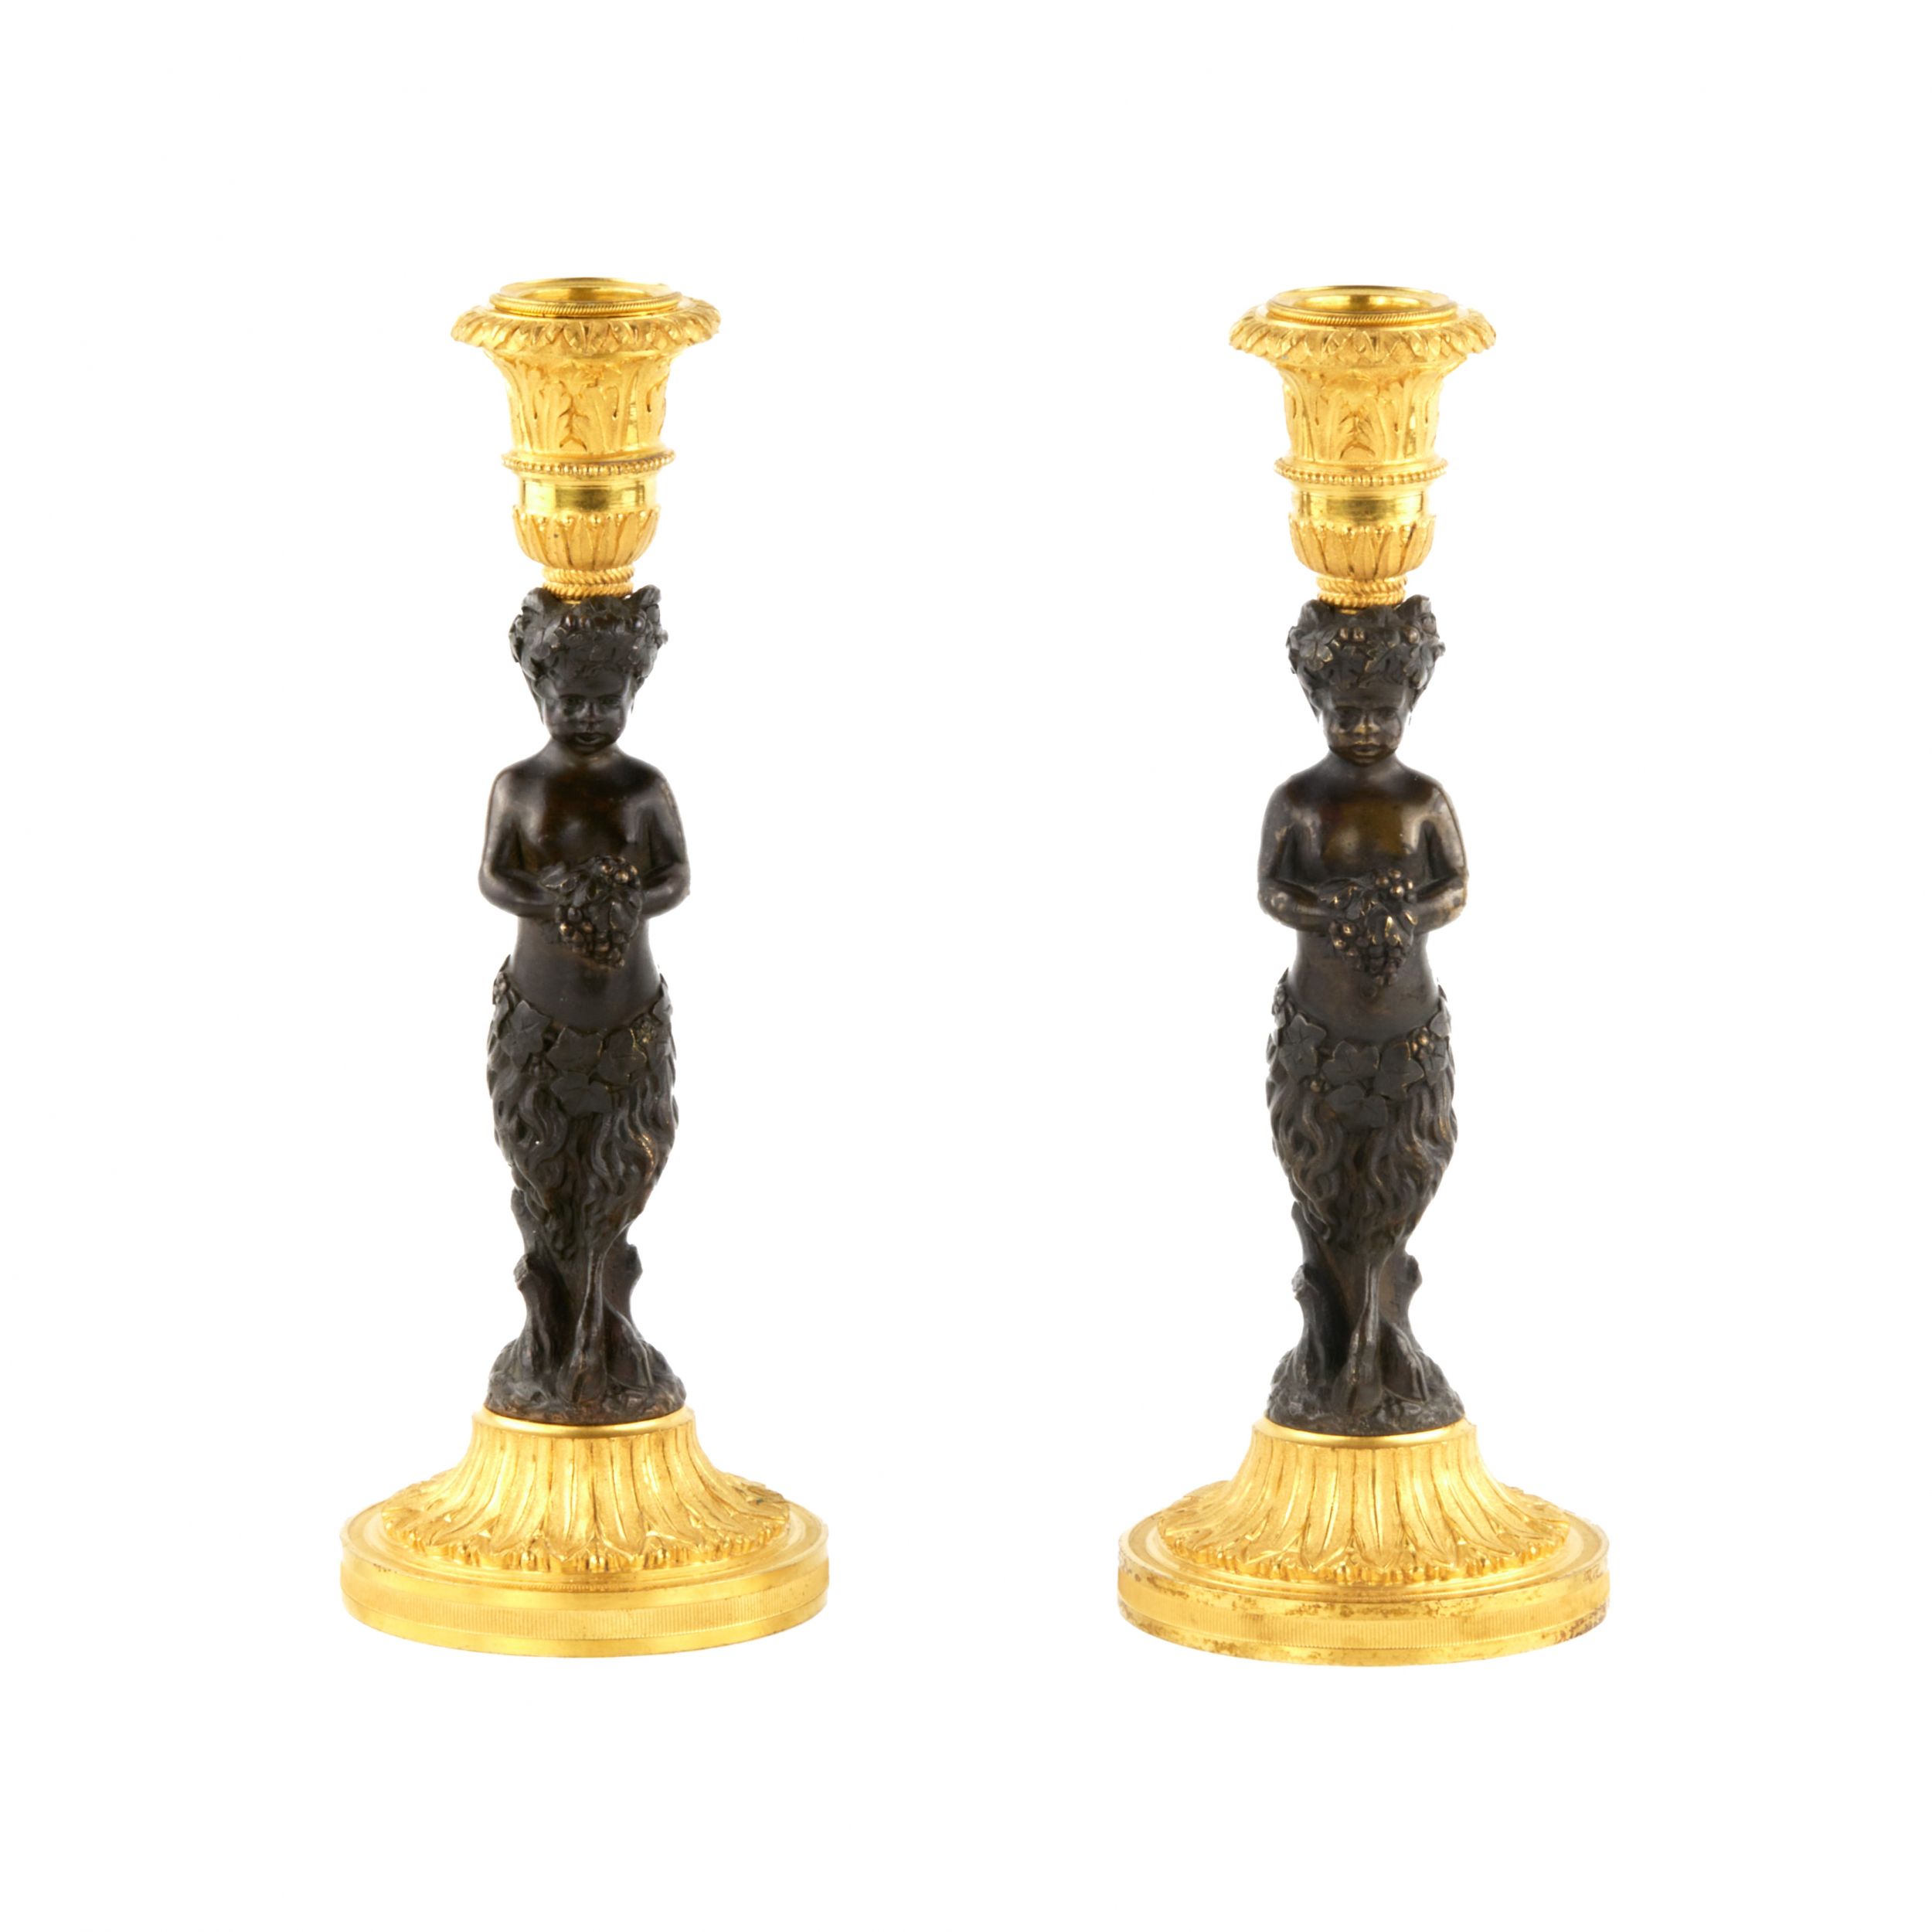 Pair-of-bronze-French-candlesticks-in-the-form-of-fauns-mid-19th-century-